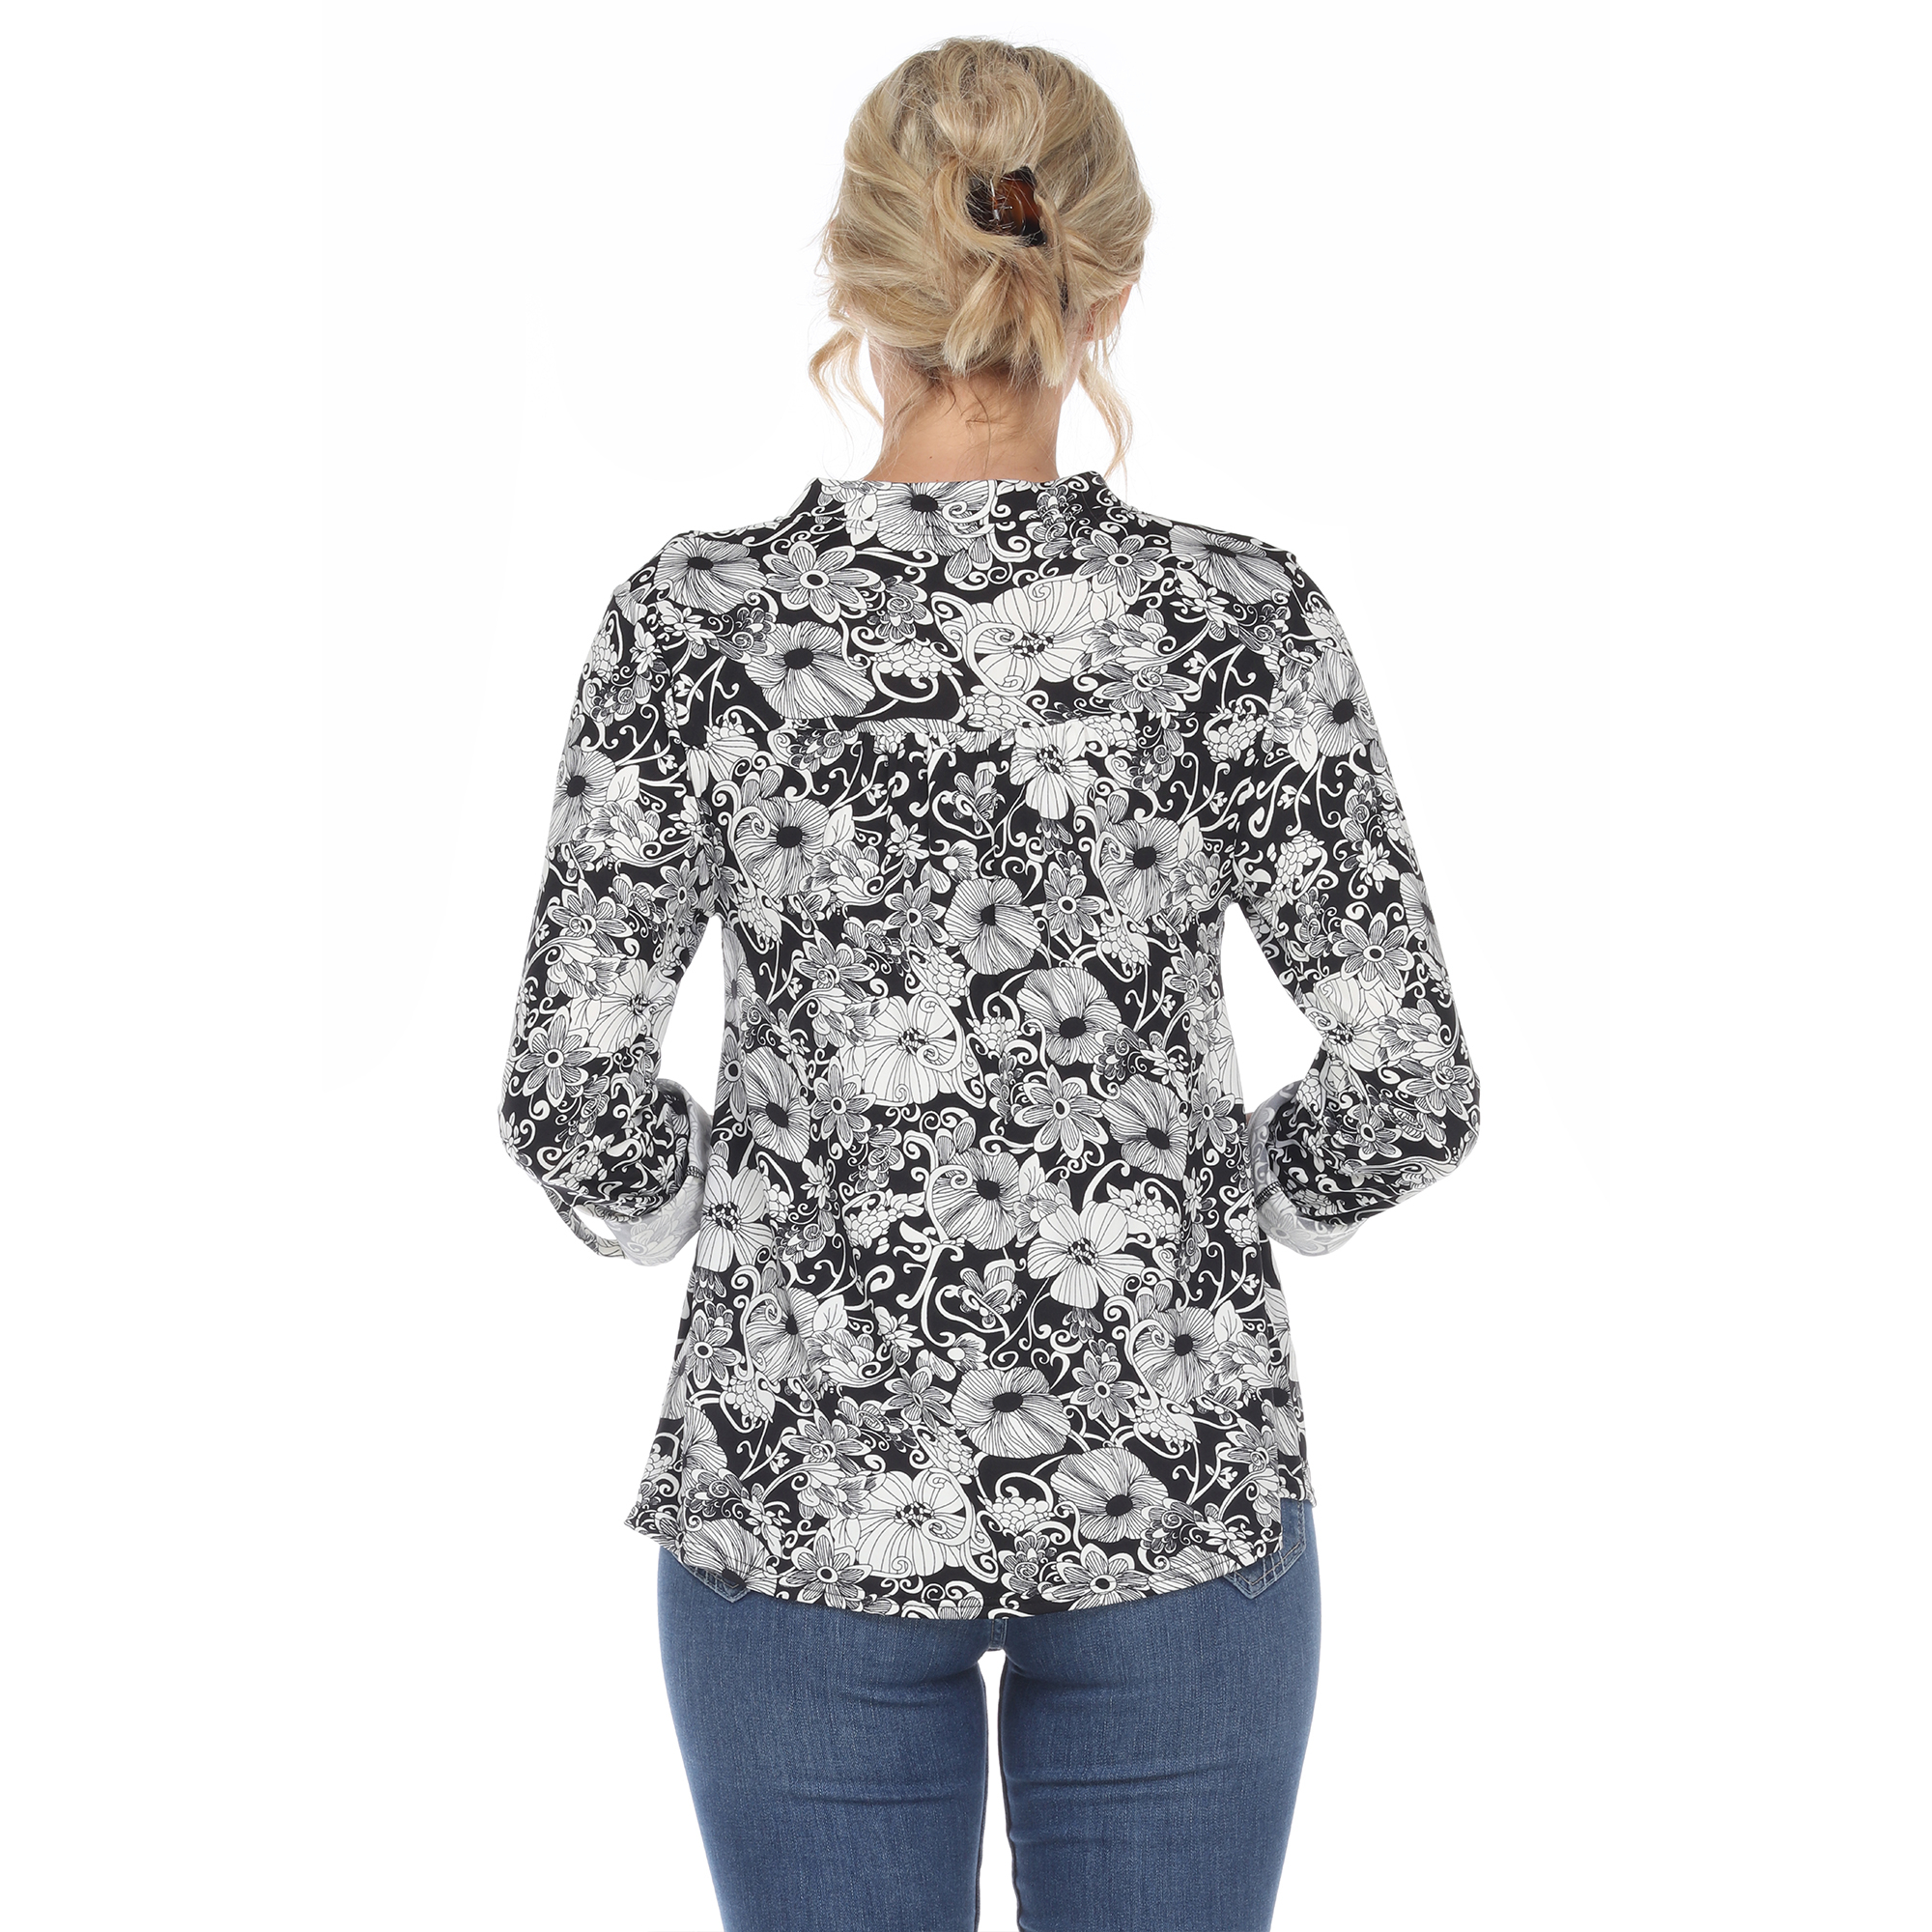 White Mark Women's Pleated Long Sleeve Floral Print Blouse - Mint, 1X